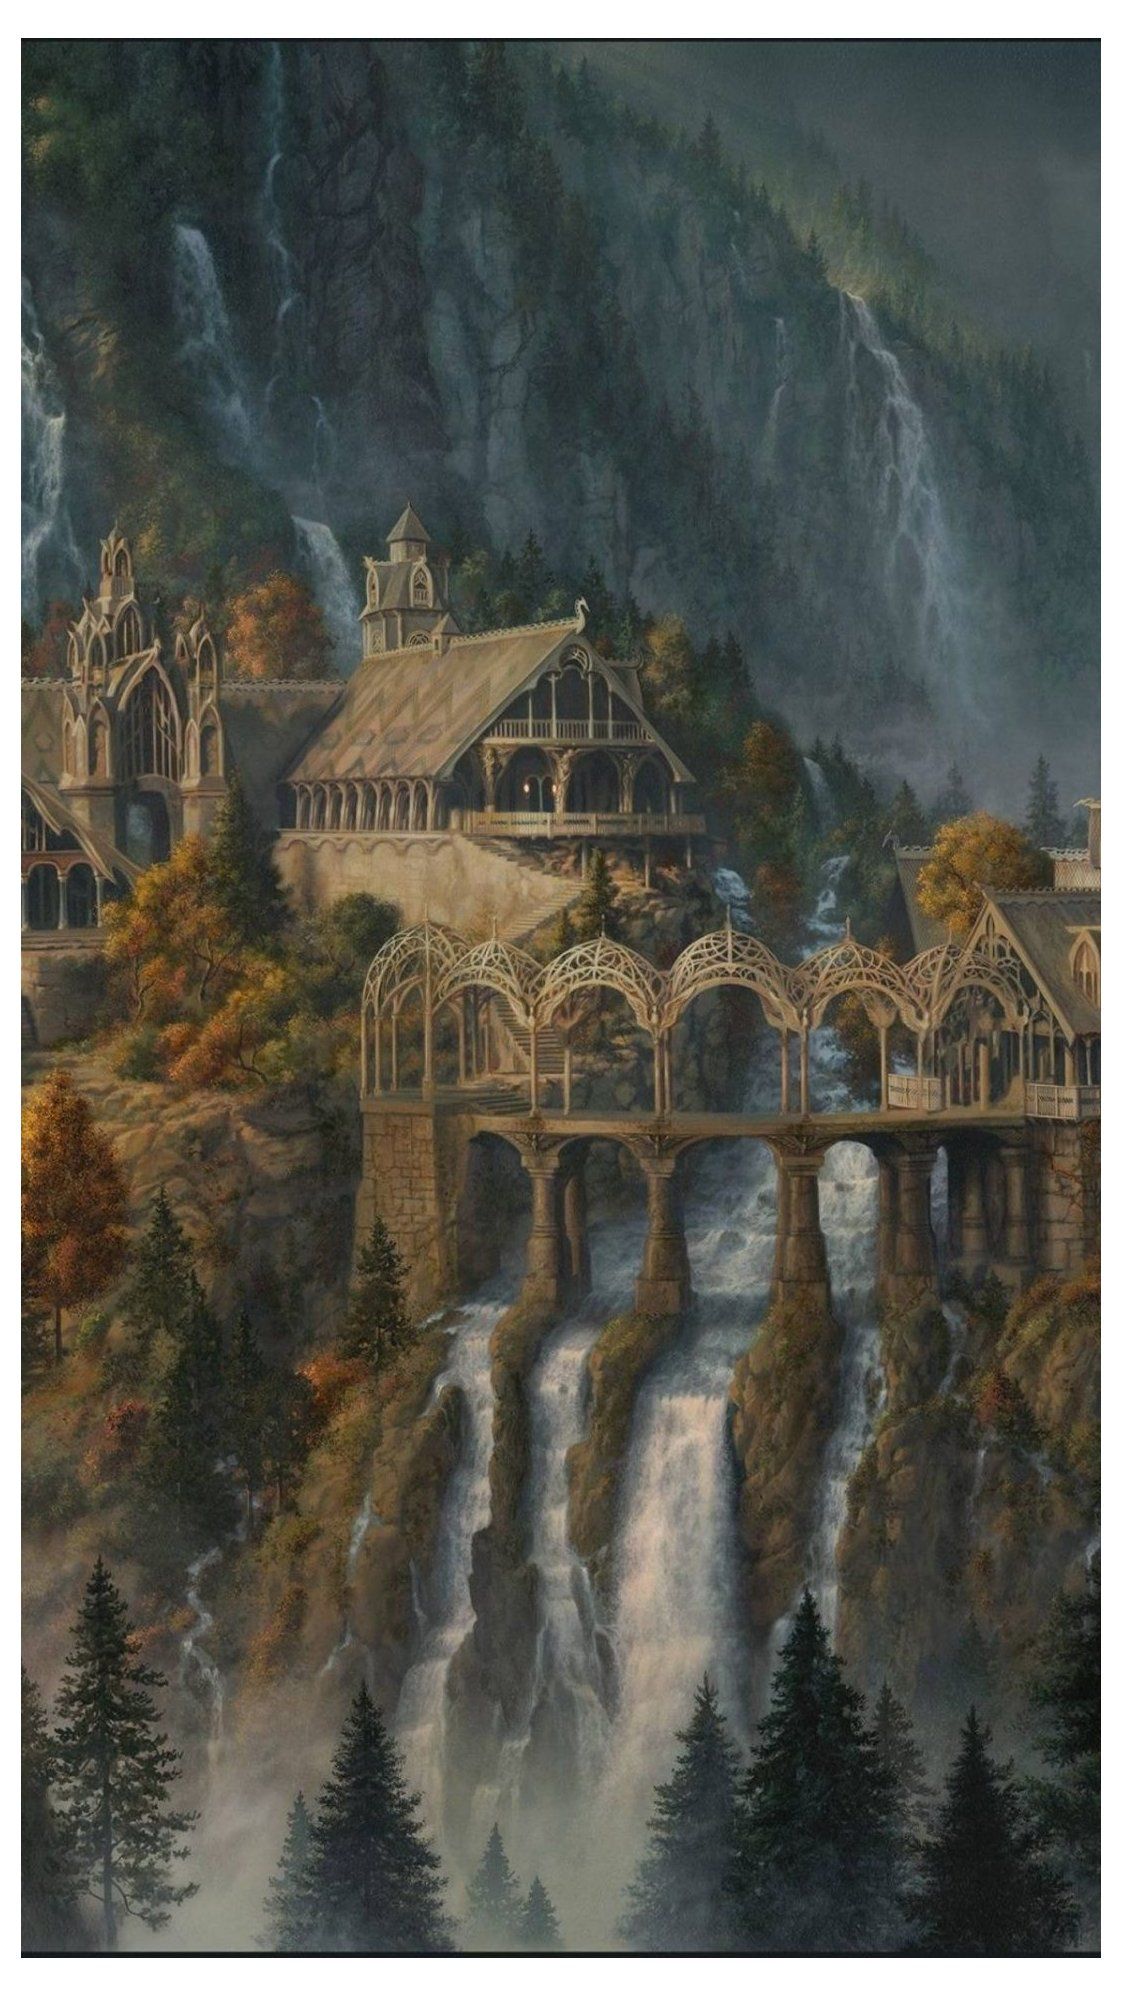 The Hobbit, The Lord of The Rings, Rivendell, Art Wallpaper for Android [Full HD], 1080x1920 Movies. Fantasy landscape, Fantasy art landscapes, Lord of the rings